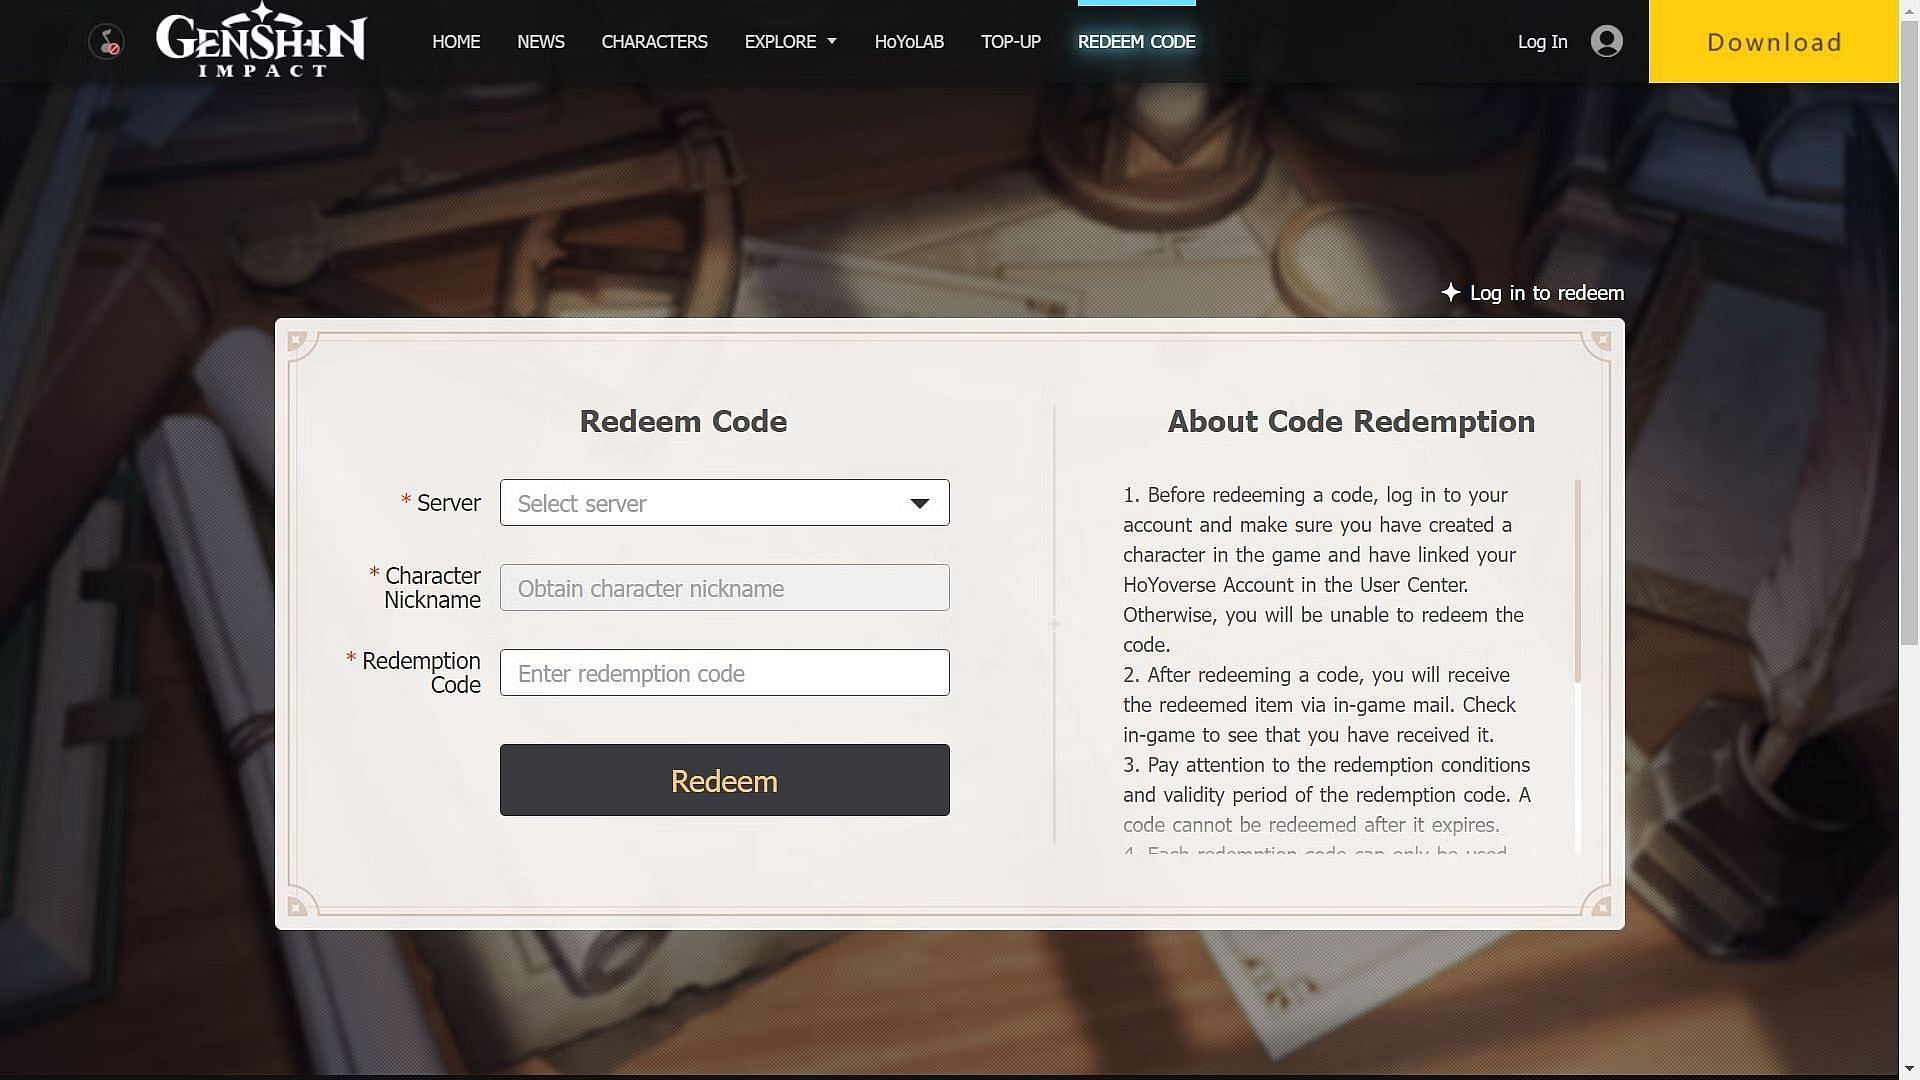 Redeeming the code on the official website. (Image via HoYoverse)